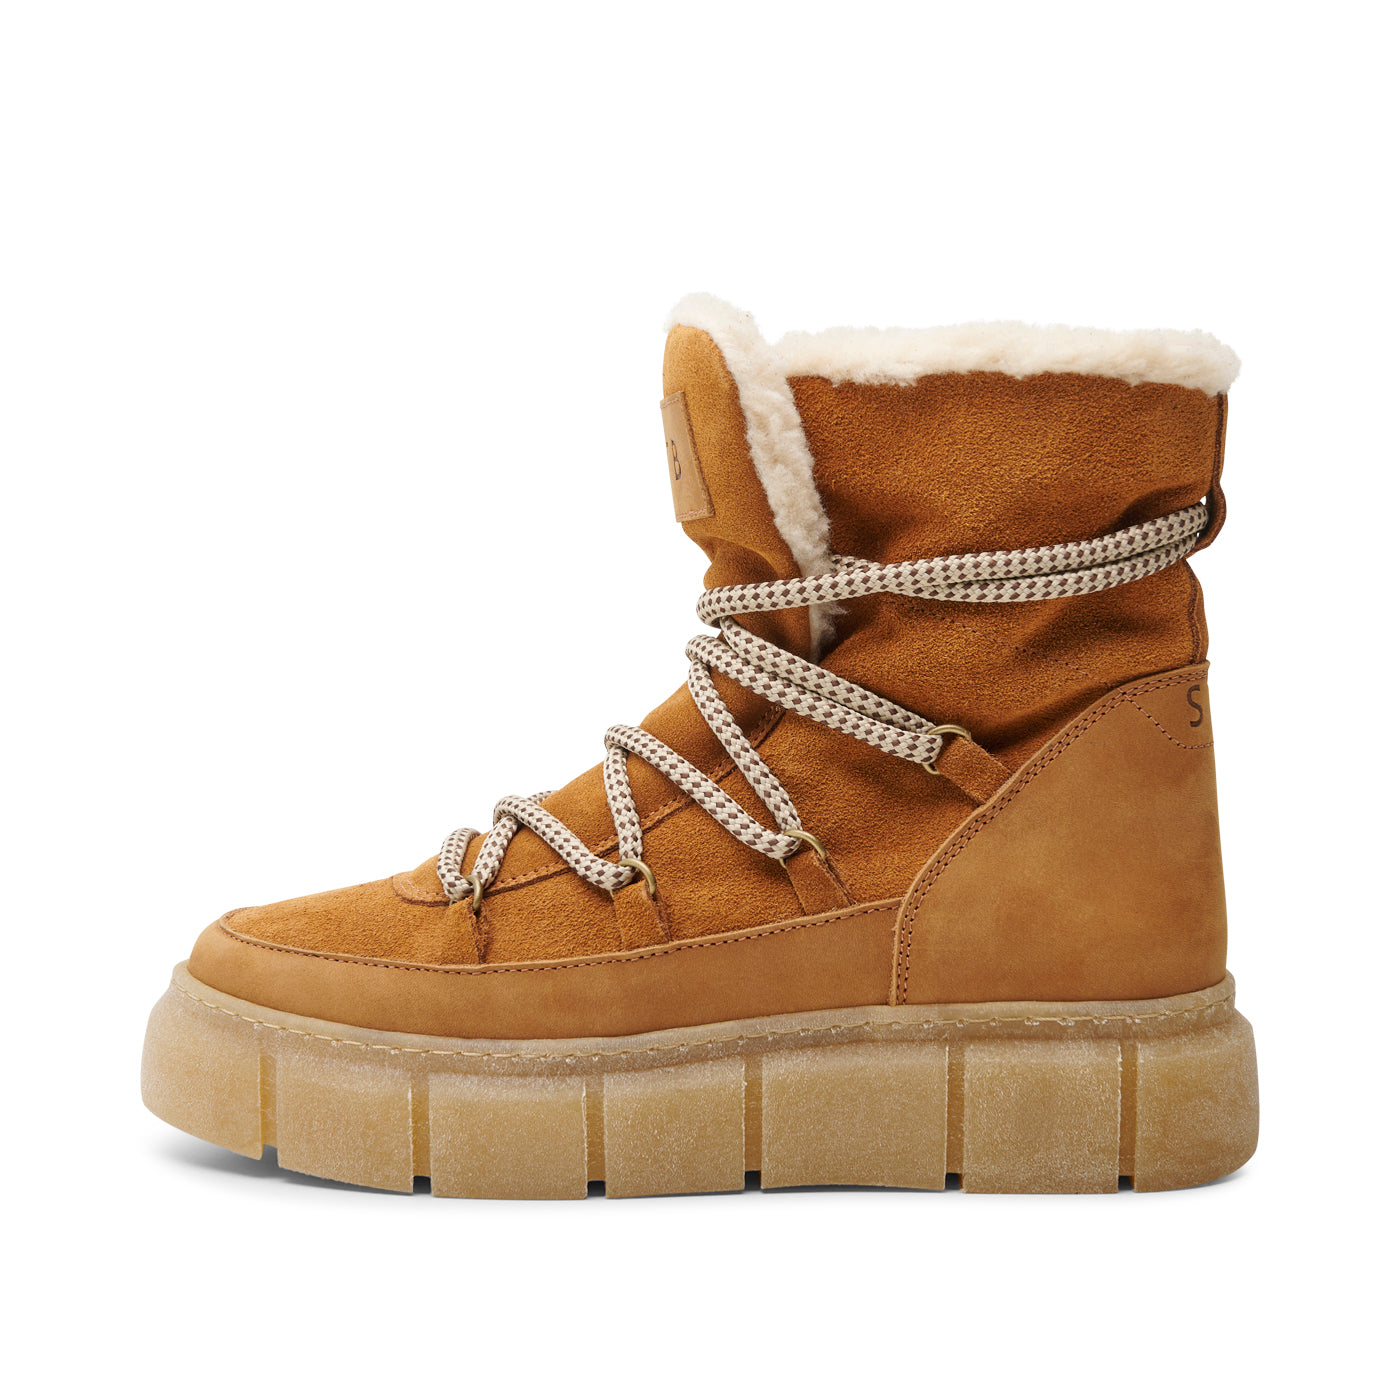 SHOE THE BEAR WOMENS Tove winter boot Boots 135 TAN